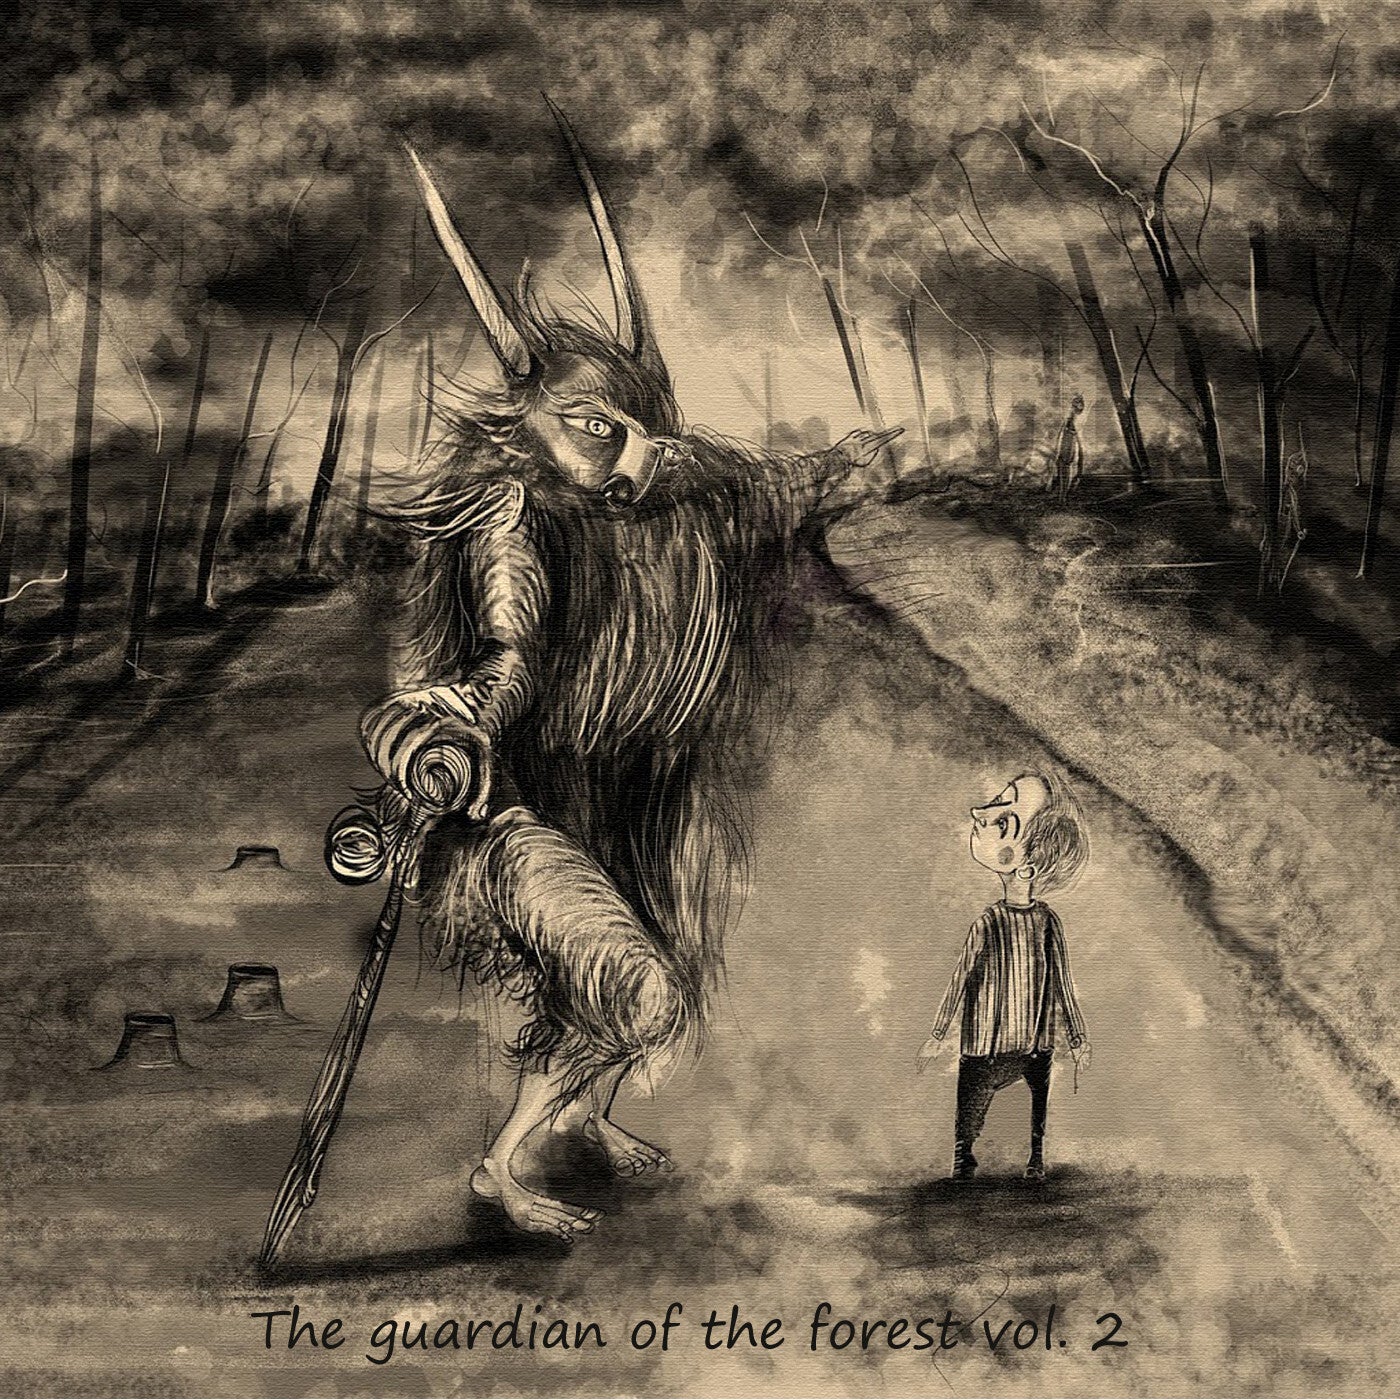 The guardian of the forest Vol. 2